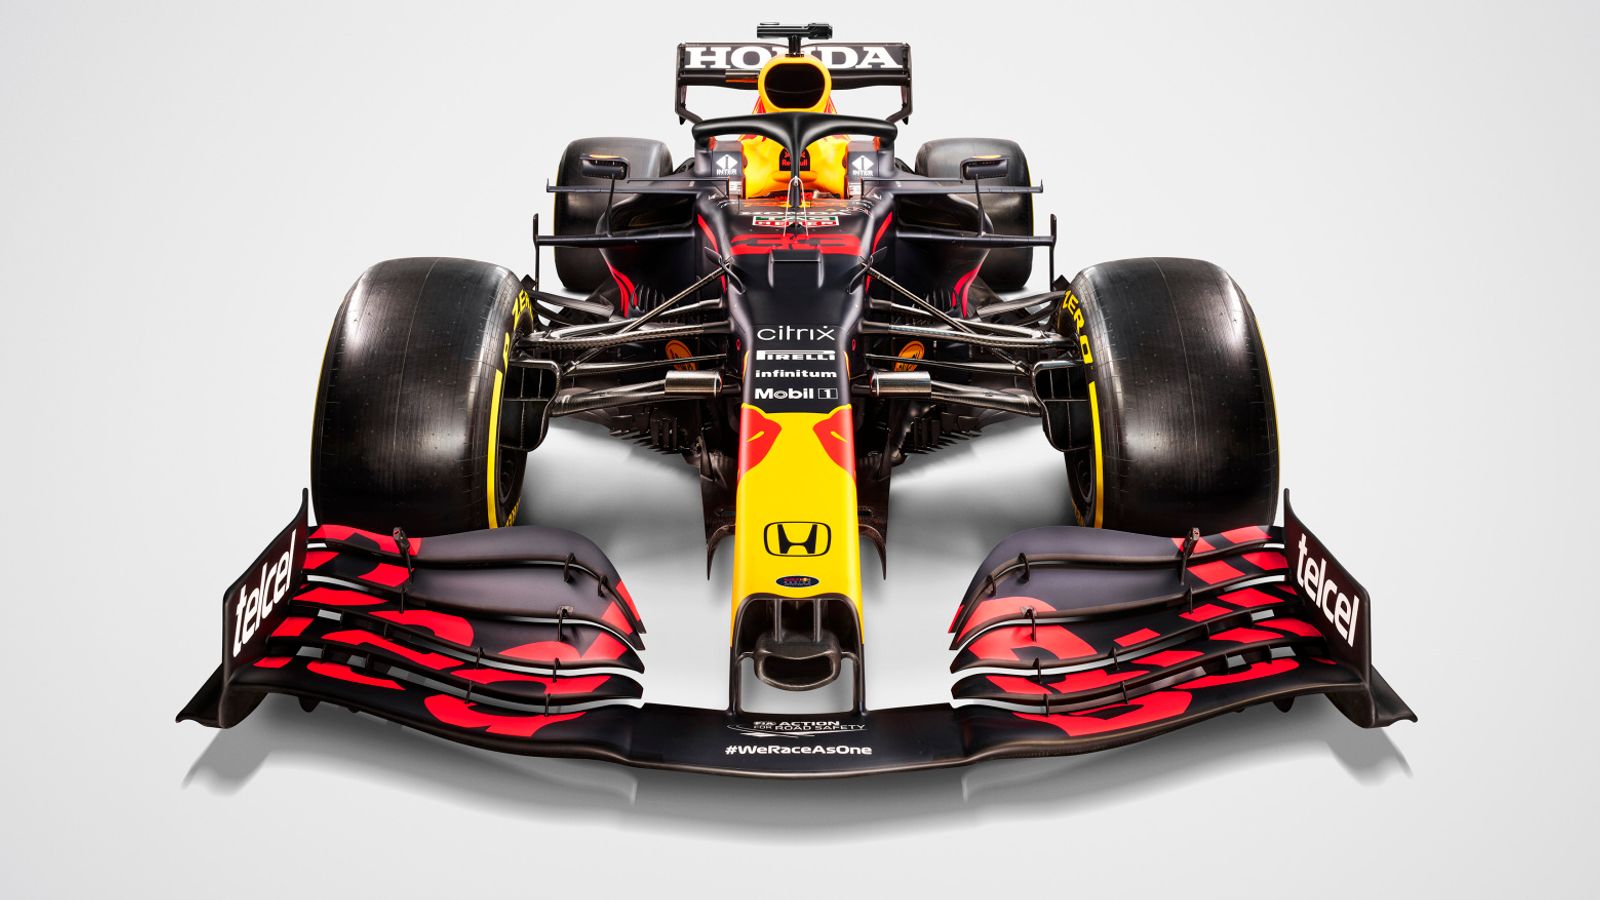 Launch of Red Bull 2021 car, the RB16B, as team effort to end Mercedes Formula 1 title streak